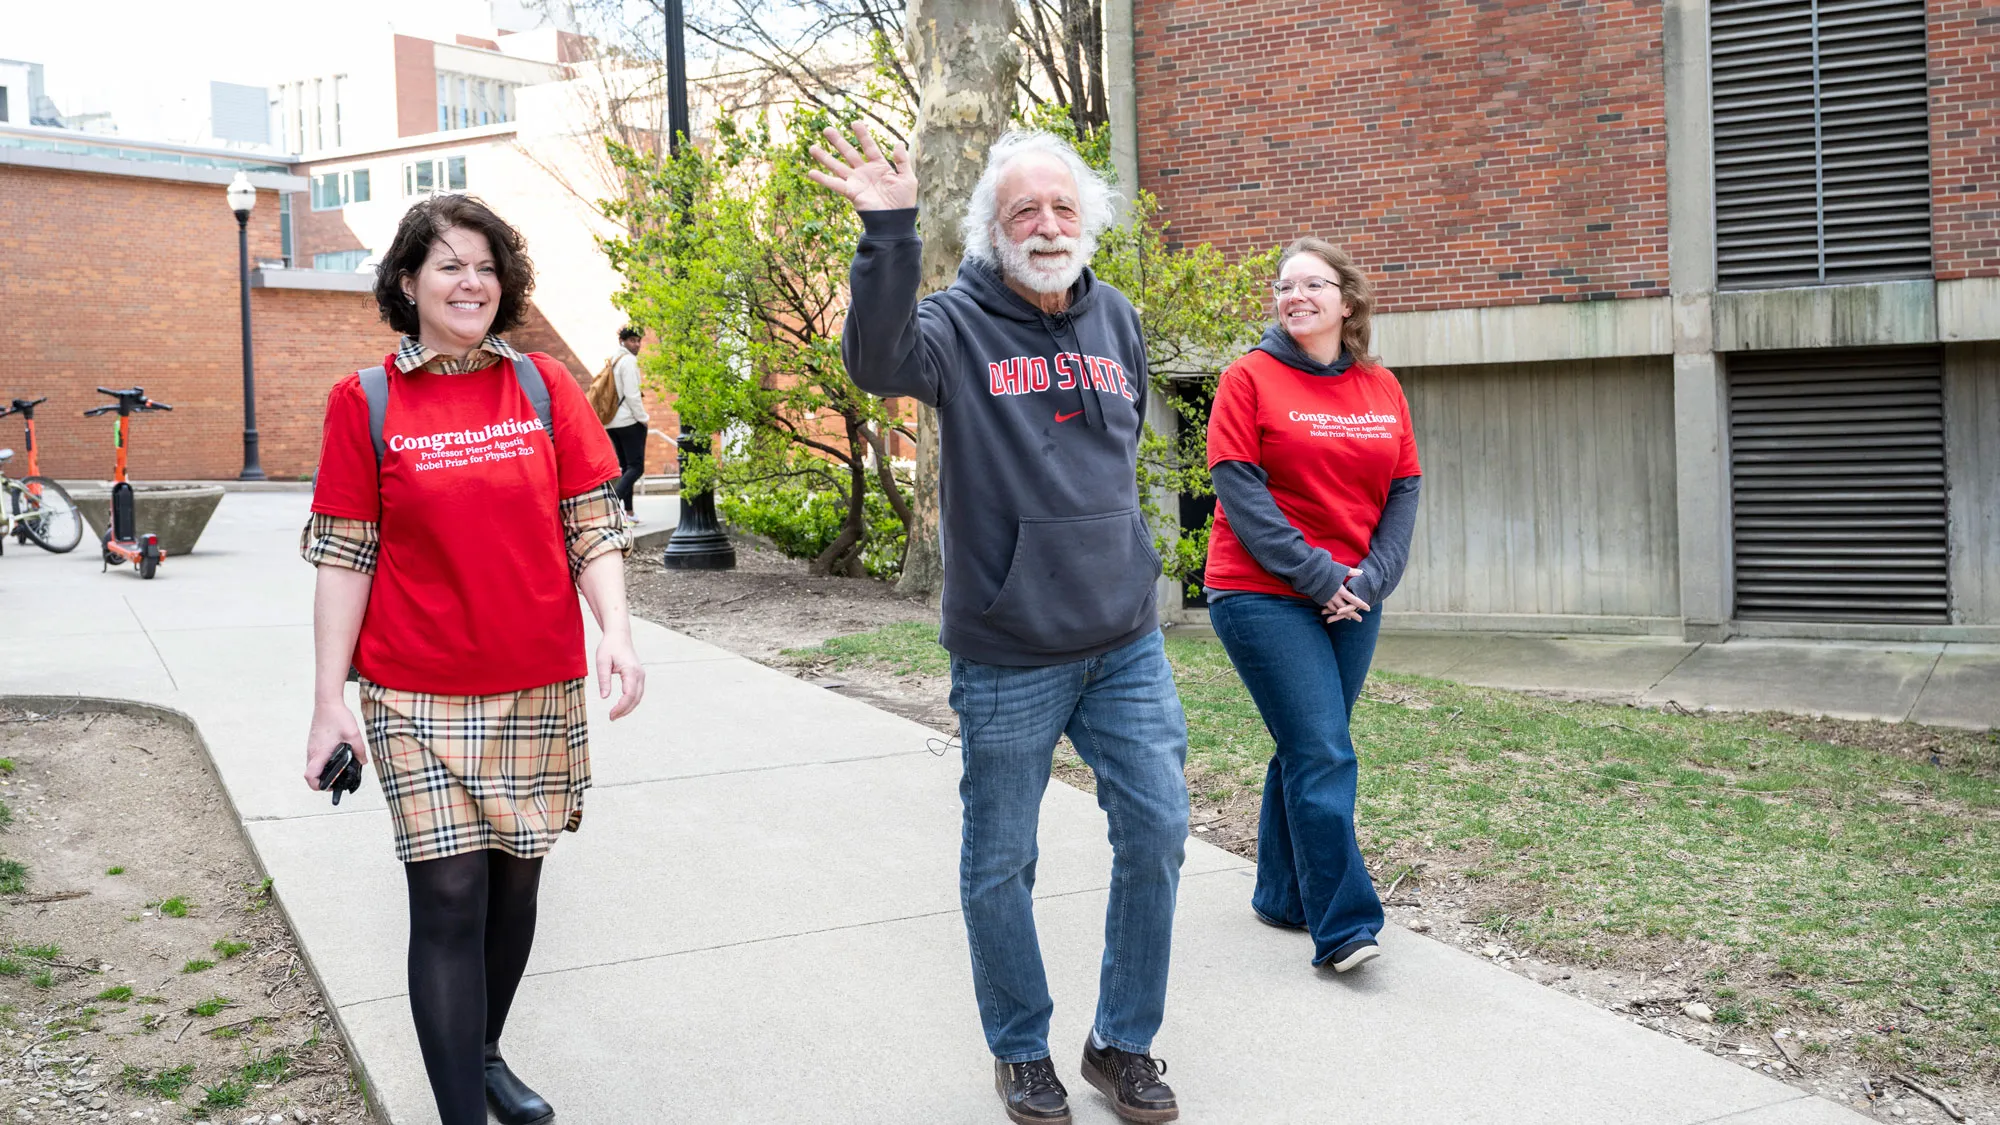 Agostini waves while walking toward a crowd of people. He is flanked by two white women who are university employees wearing Ohio State T-shirts that say “Congratulations.” They’re both grinning, and all three seem to be enjoying the cheers of the crowd, people who are not shown in this photo. Agostini wears an Ohio State sweatshirt. 